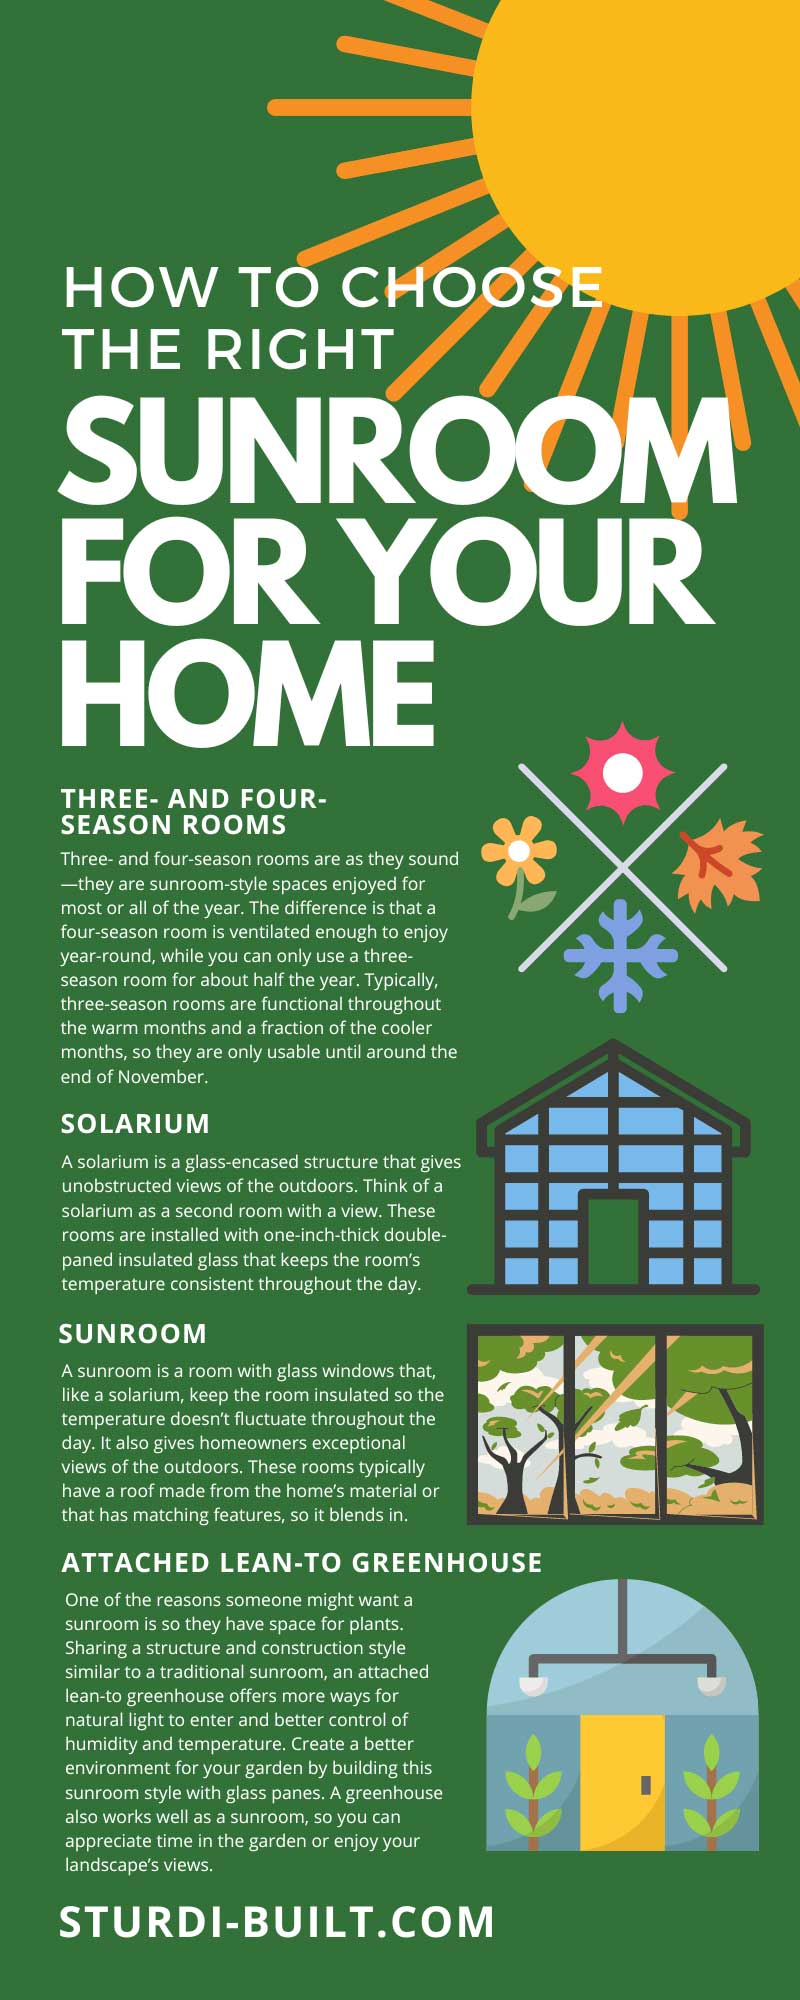 How To Choose the Right Sunroom for Your Home 